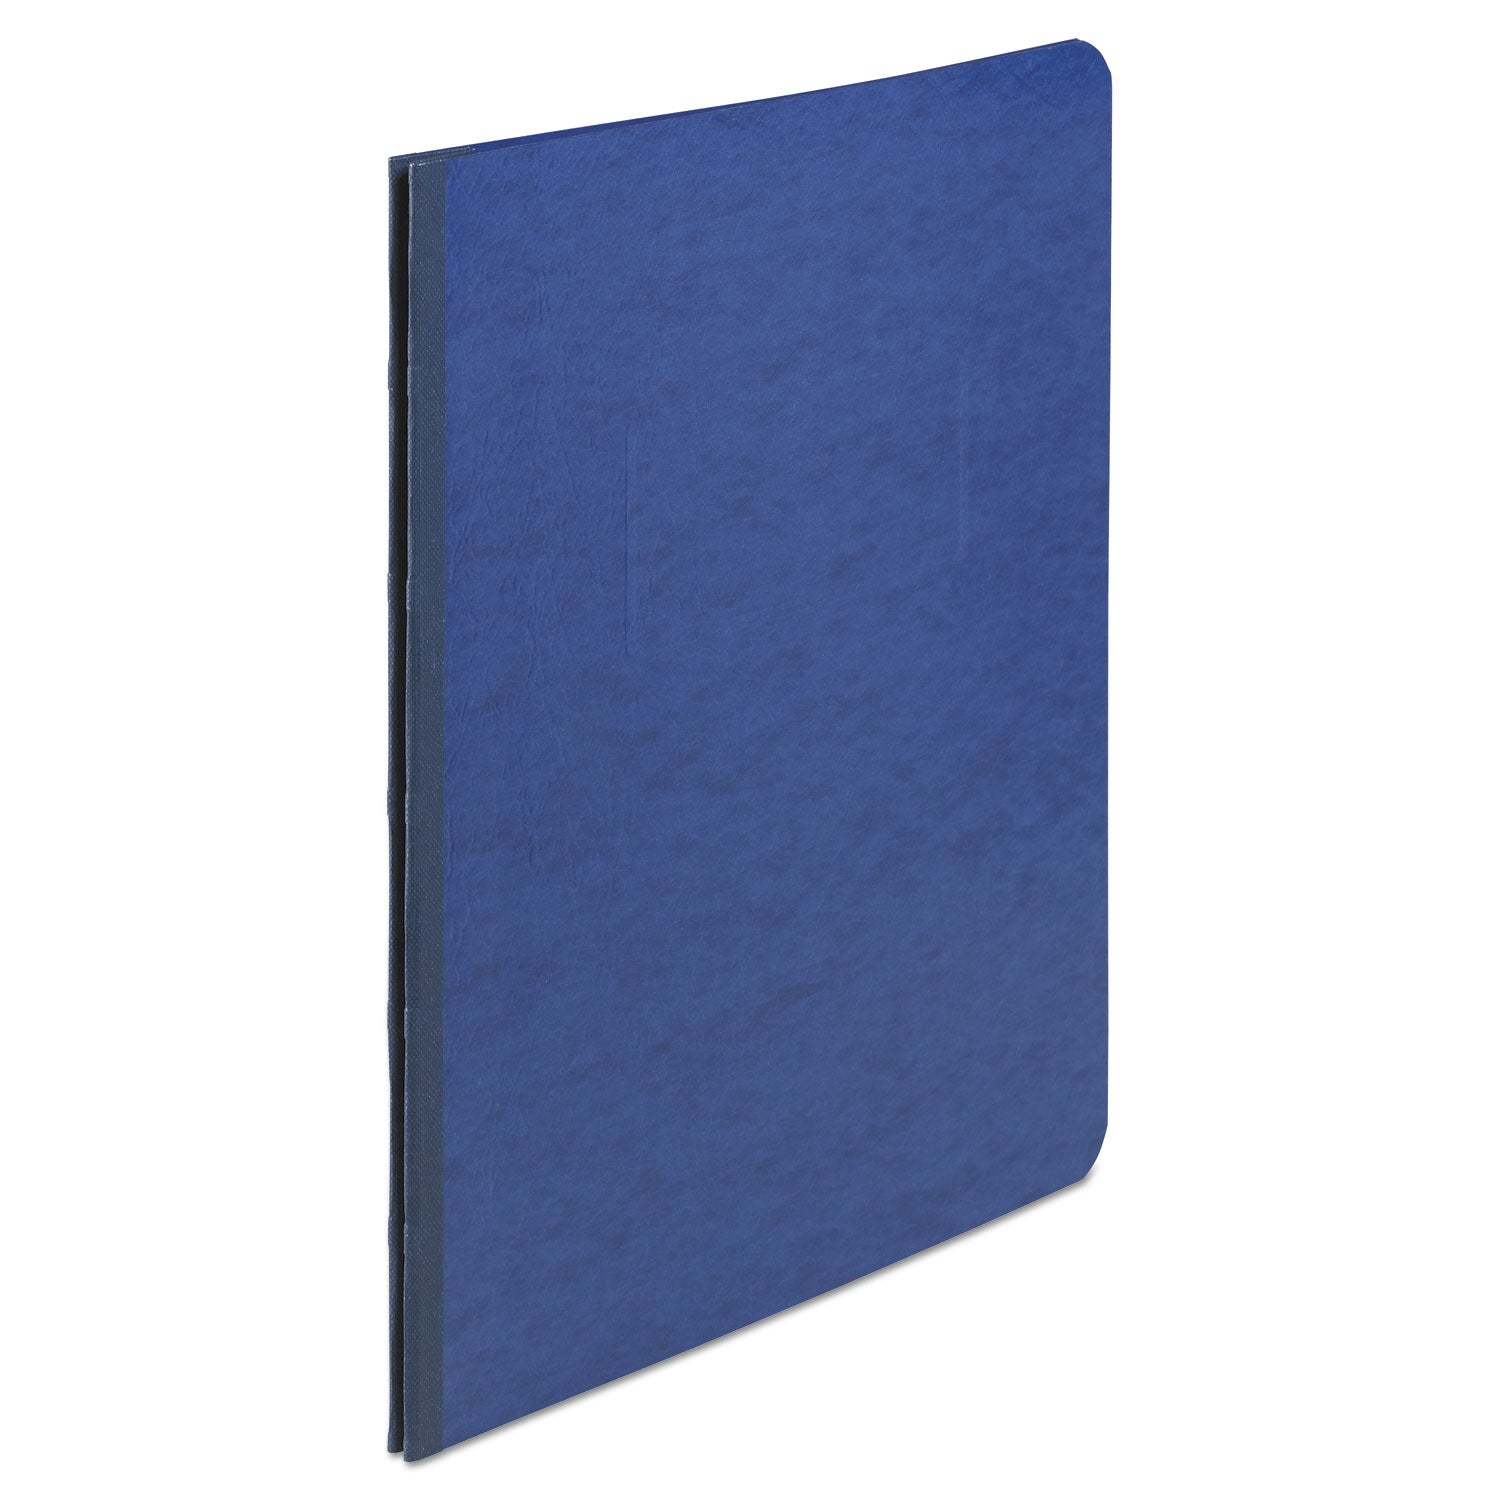 PRESSTEX Report Cover with Tyvek Reinforced Hinge, Side Bound, Two-Piece Prong Fastener, 3" Capacity, 8.5 x 11, Dark Blue - 